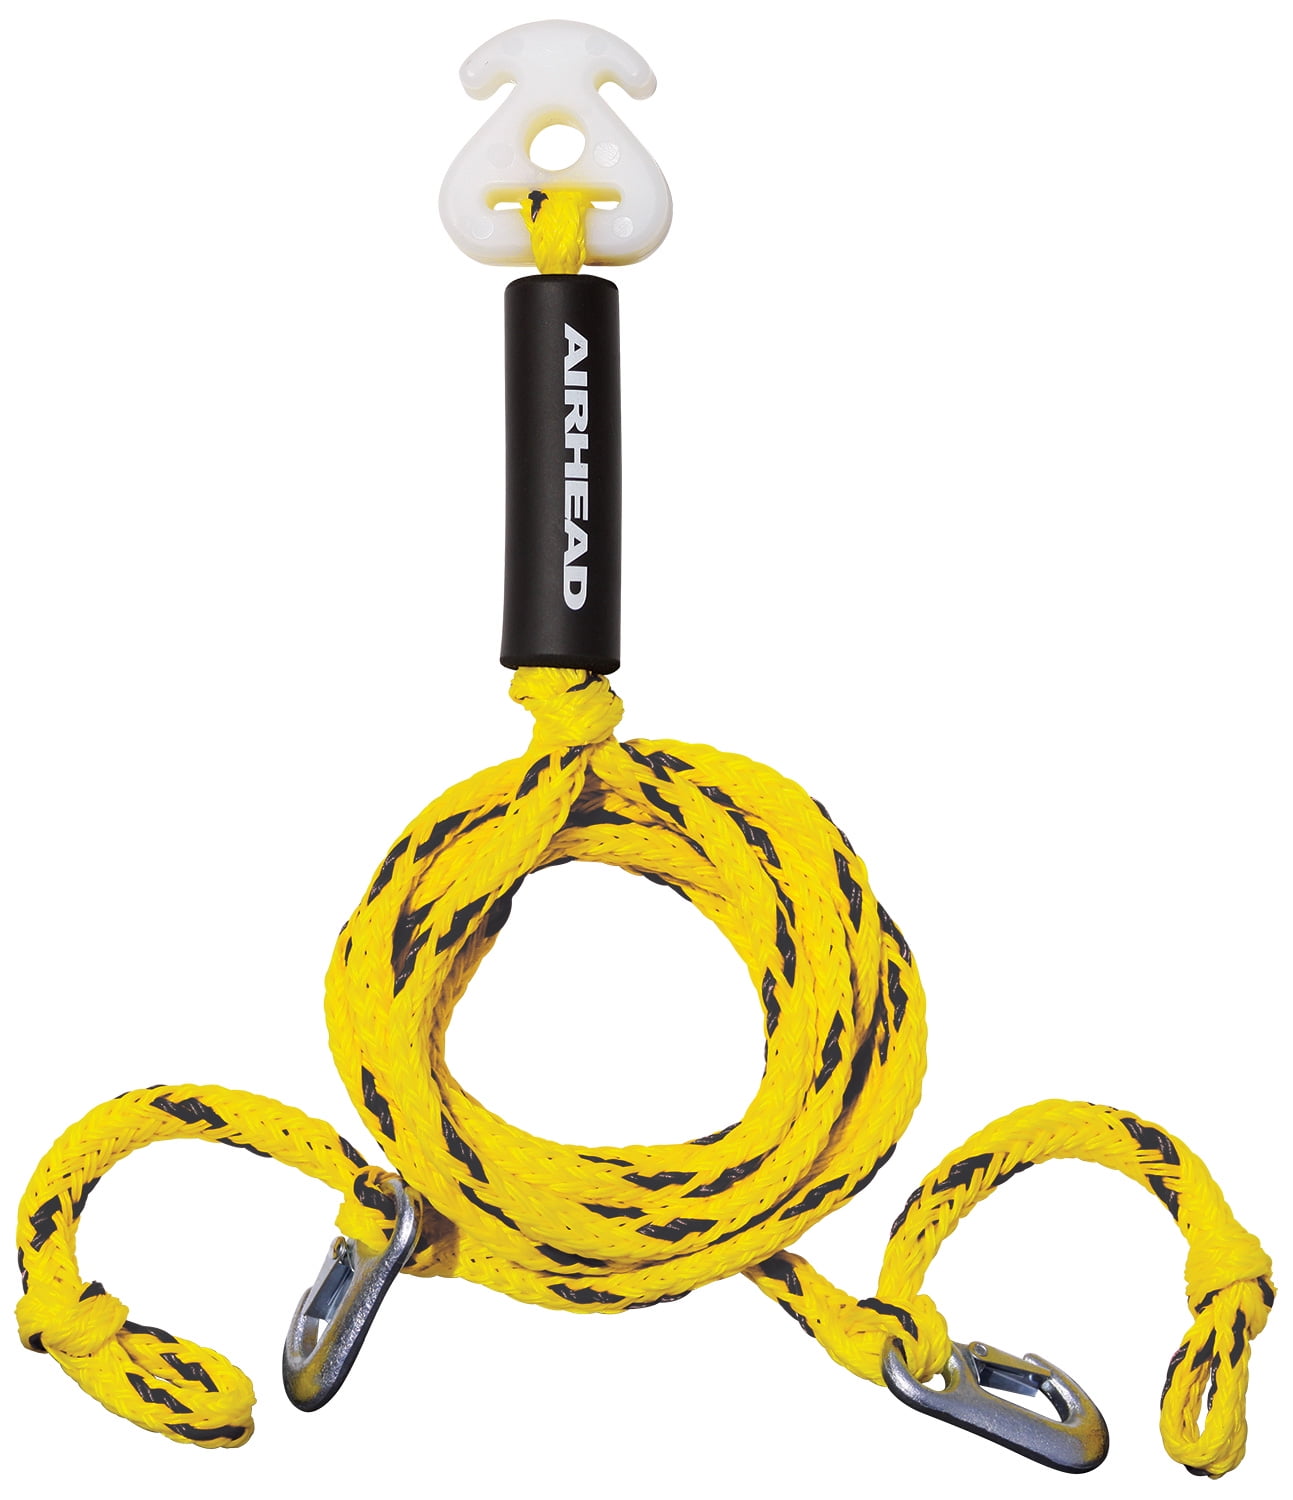 AIRHEADTow Demon Wakeboarding Water Skiing 8' Float Rope AHTH-4 NEW 